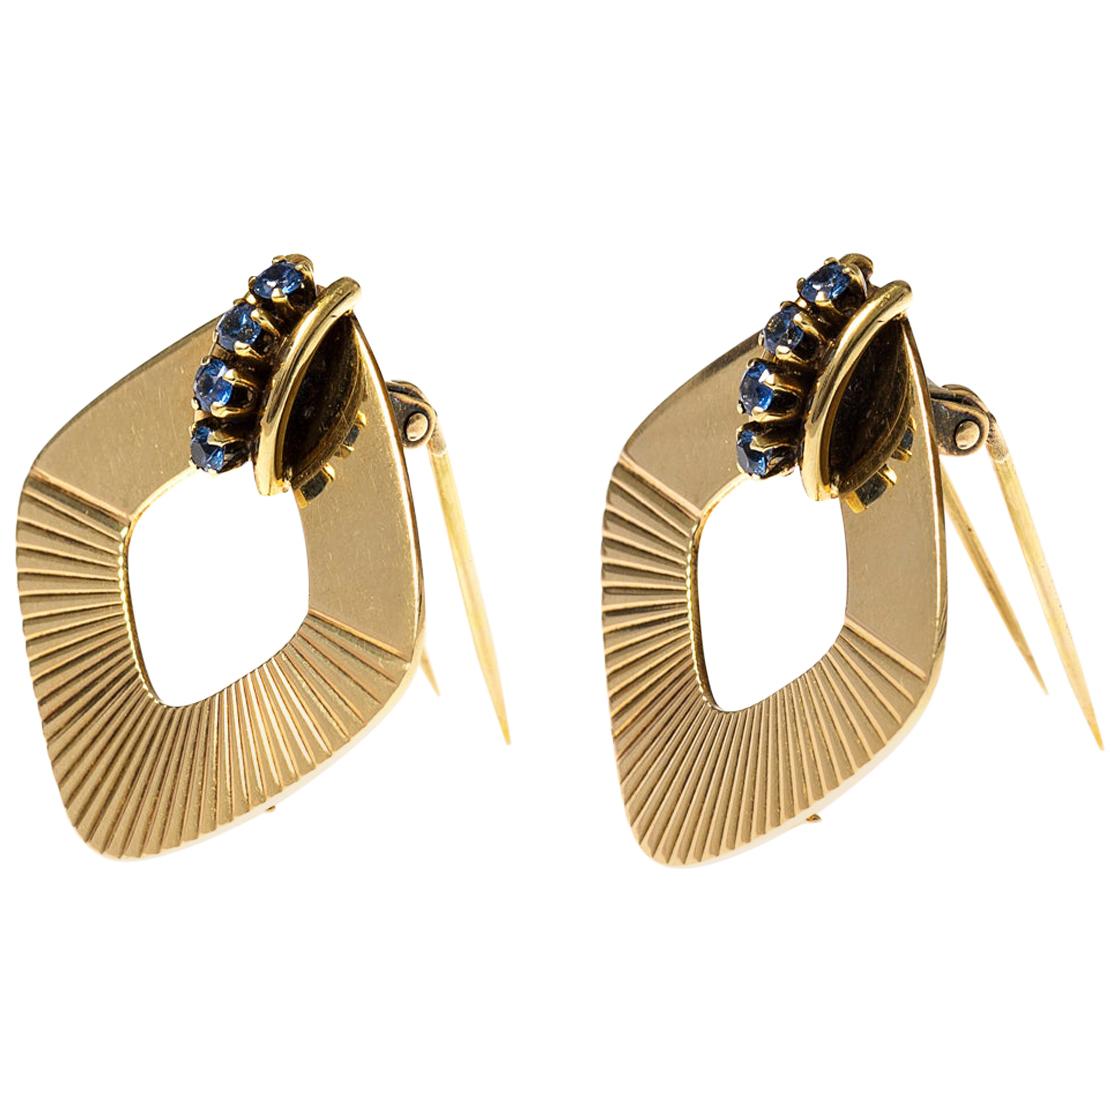 Tiffany & Co. Clip Brooches in 14 Karat Gold and Sapphires, New York, circa 1950 For Sale